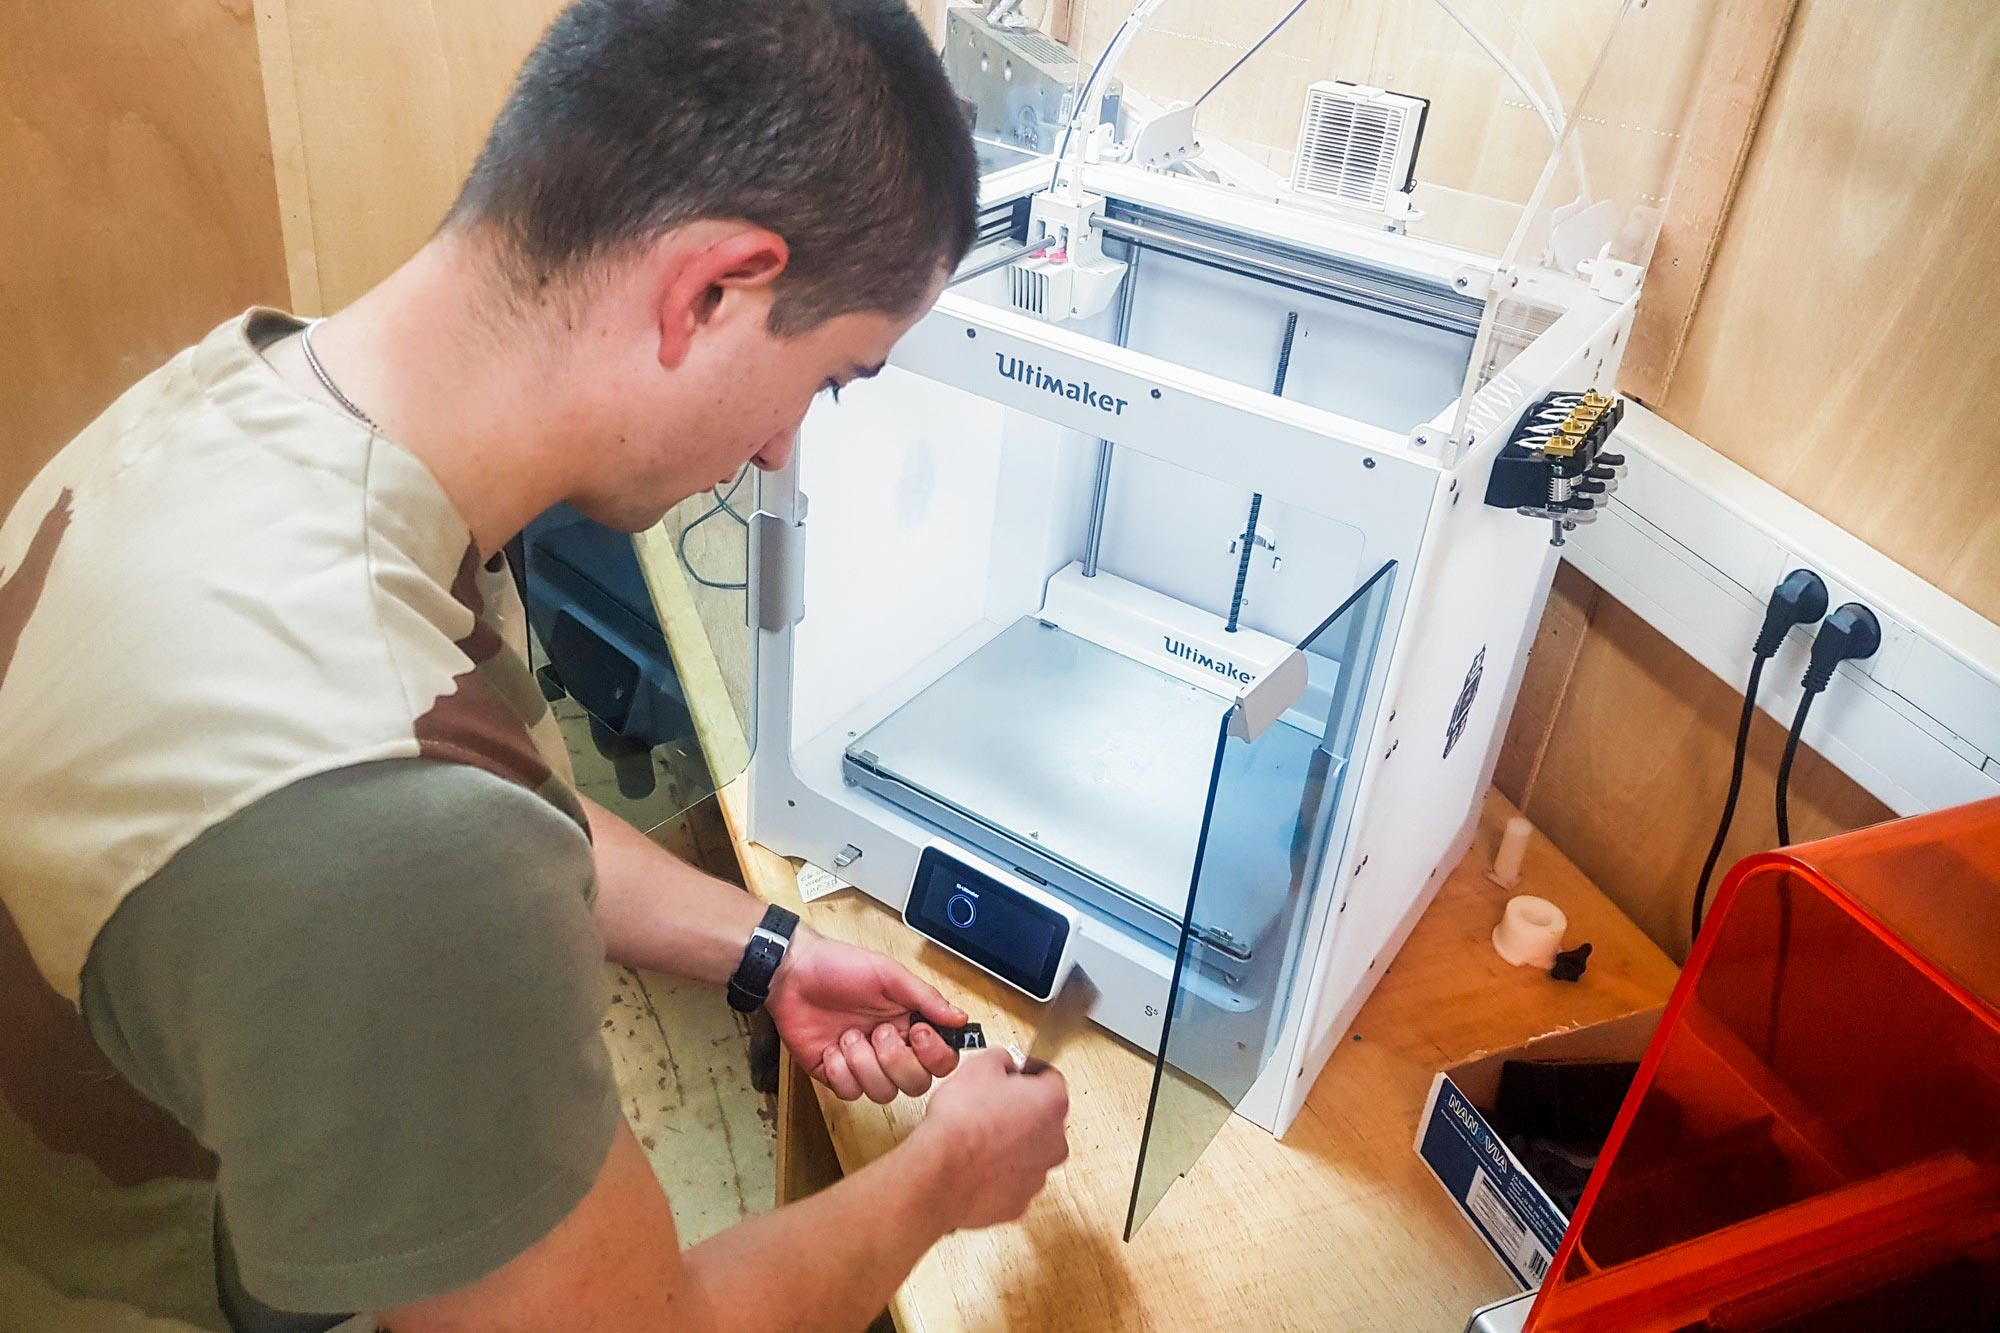 French soldier 3D prints parts in Gao, Mali